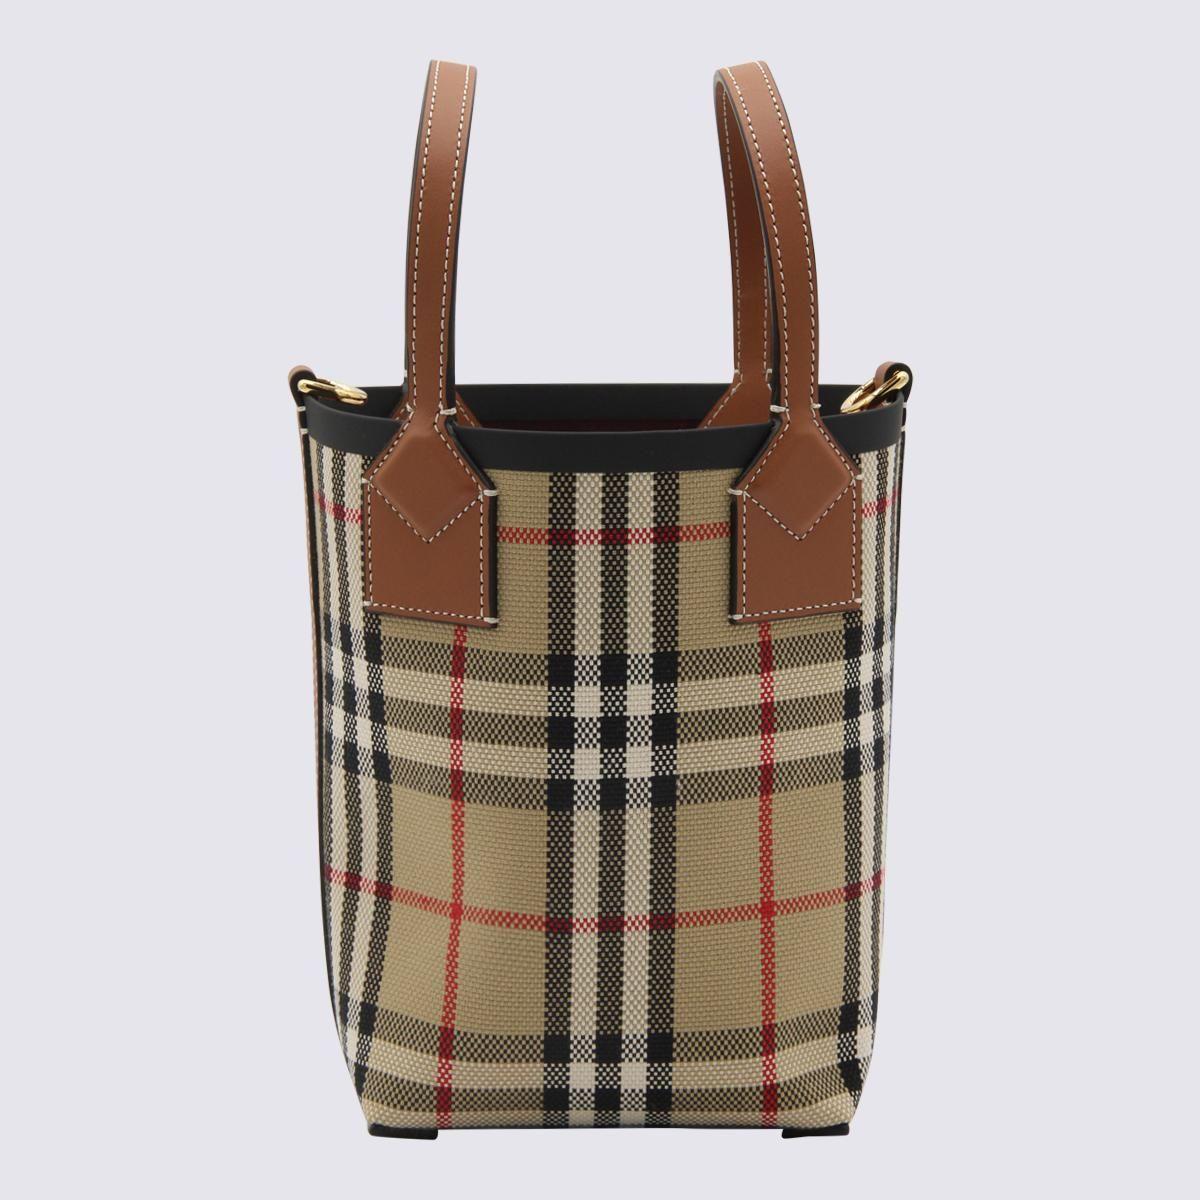 Burberry Vintage Check London Mini Bucket Bag in Brown | Lyst